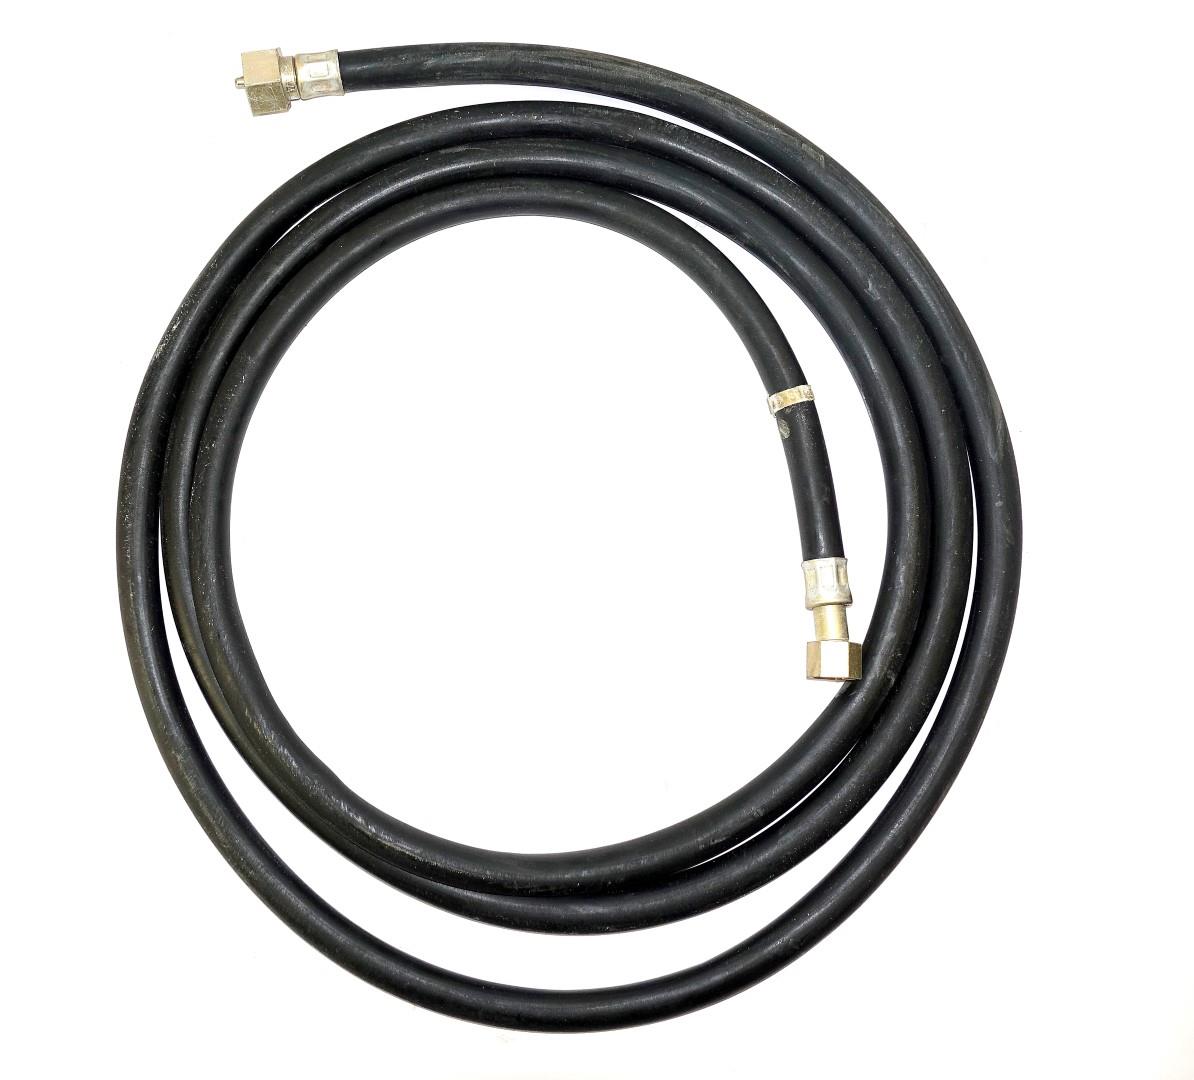 SP-2033 | 6680-00-507-9980 Speedometer Cable (3) (Large).JPG